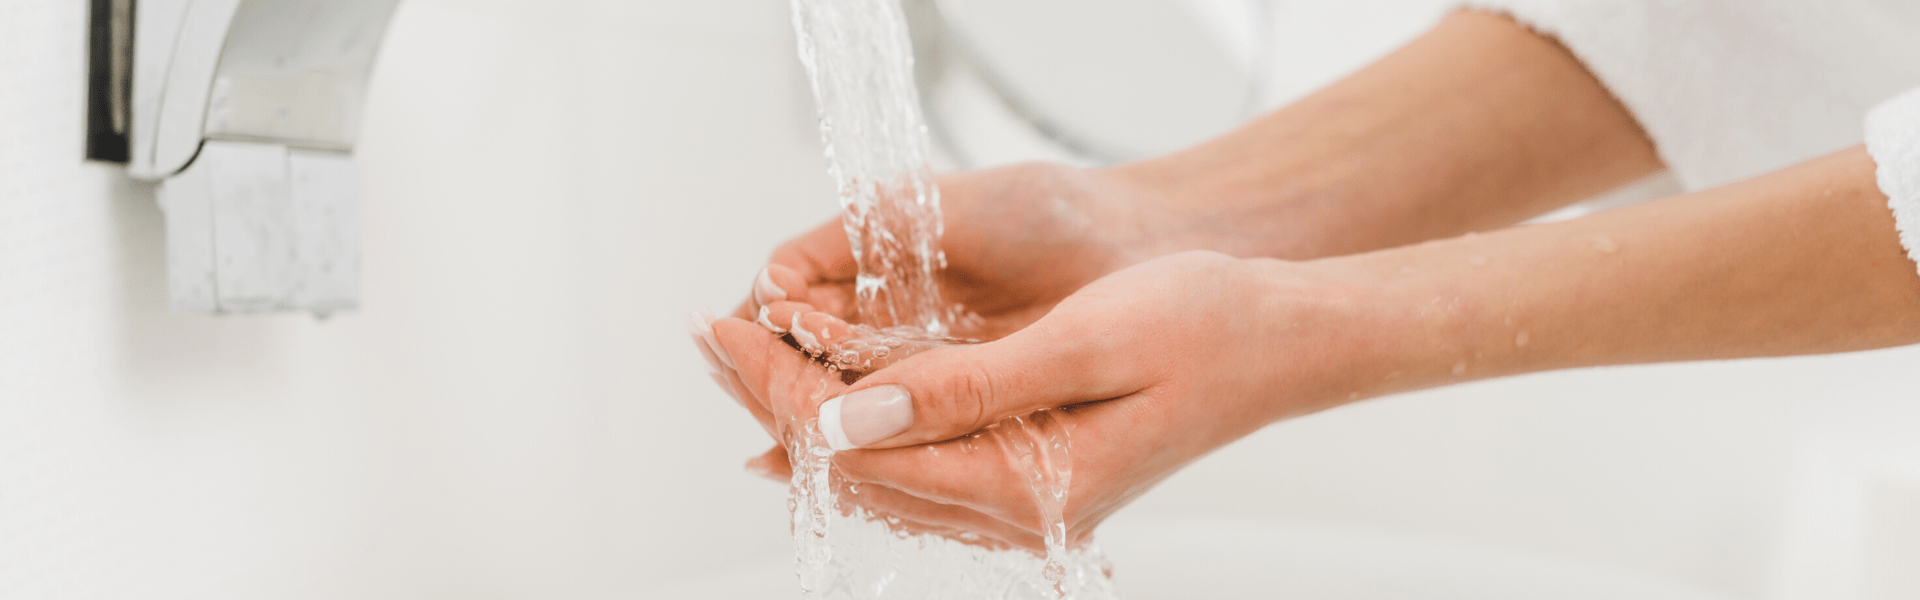 healthy hand washing during covid-19